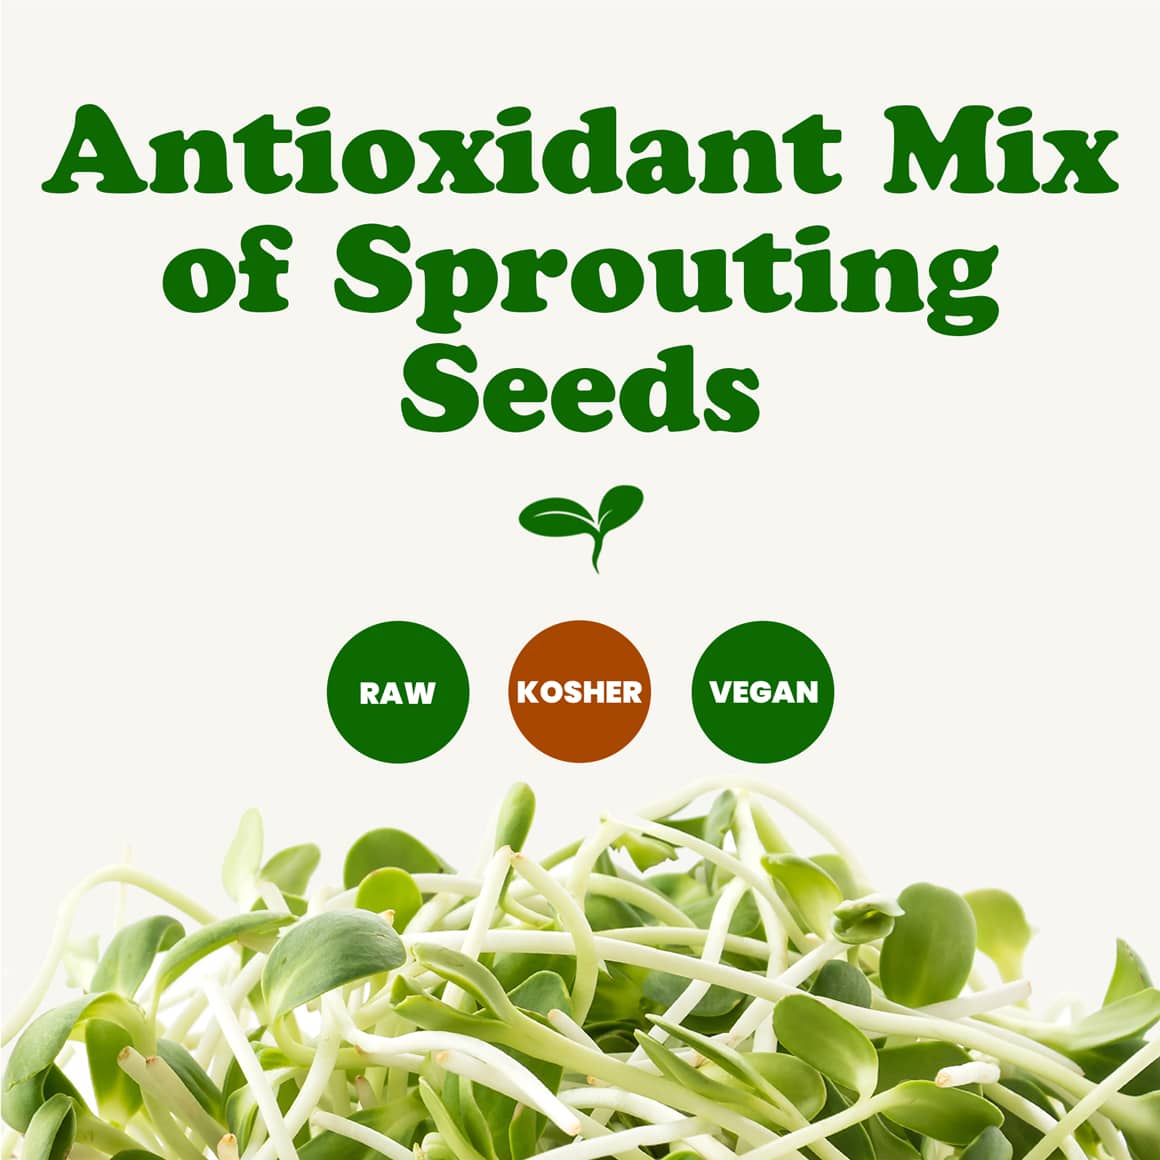 antioxidant-mix-of-sprouting-seeds-2-min